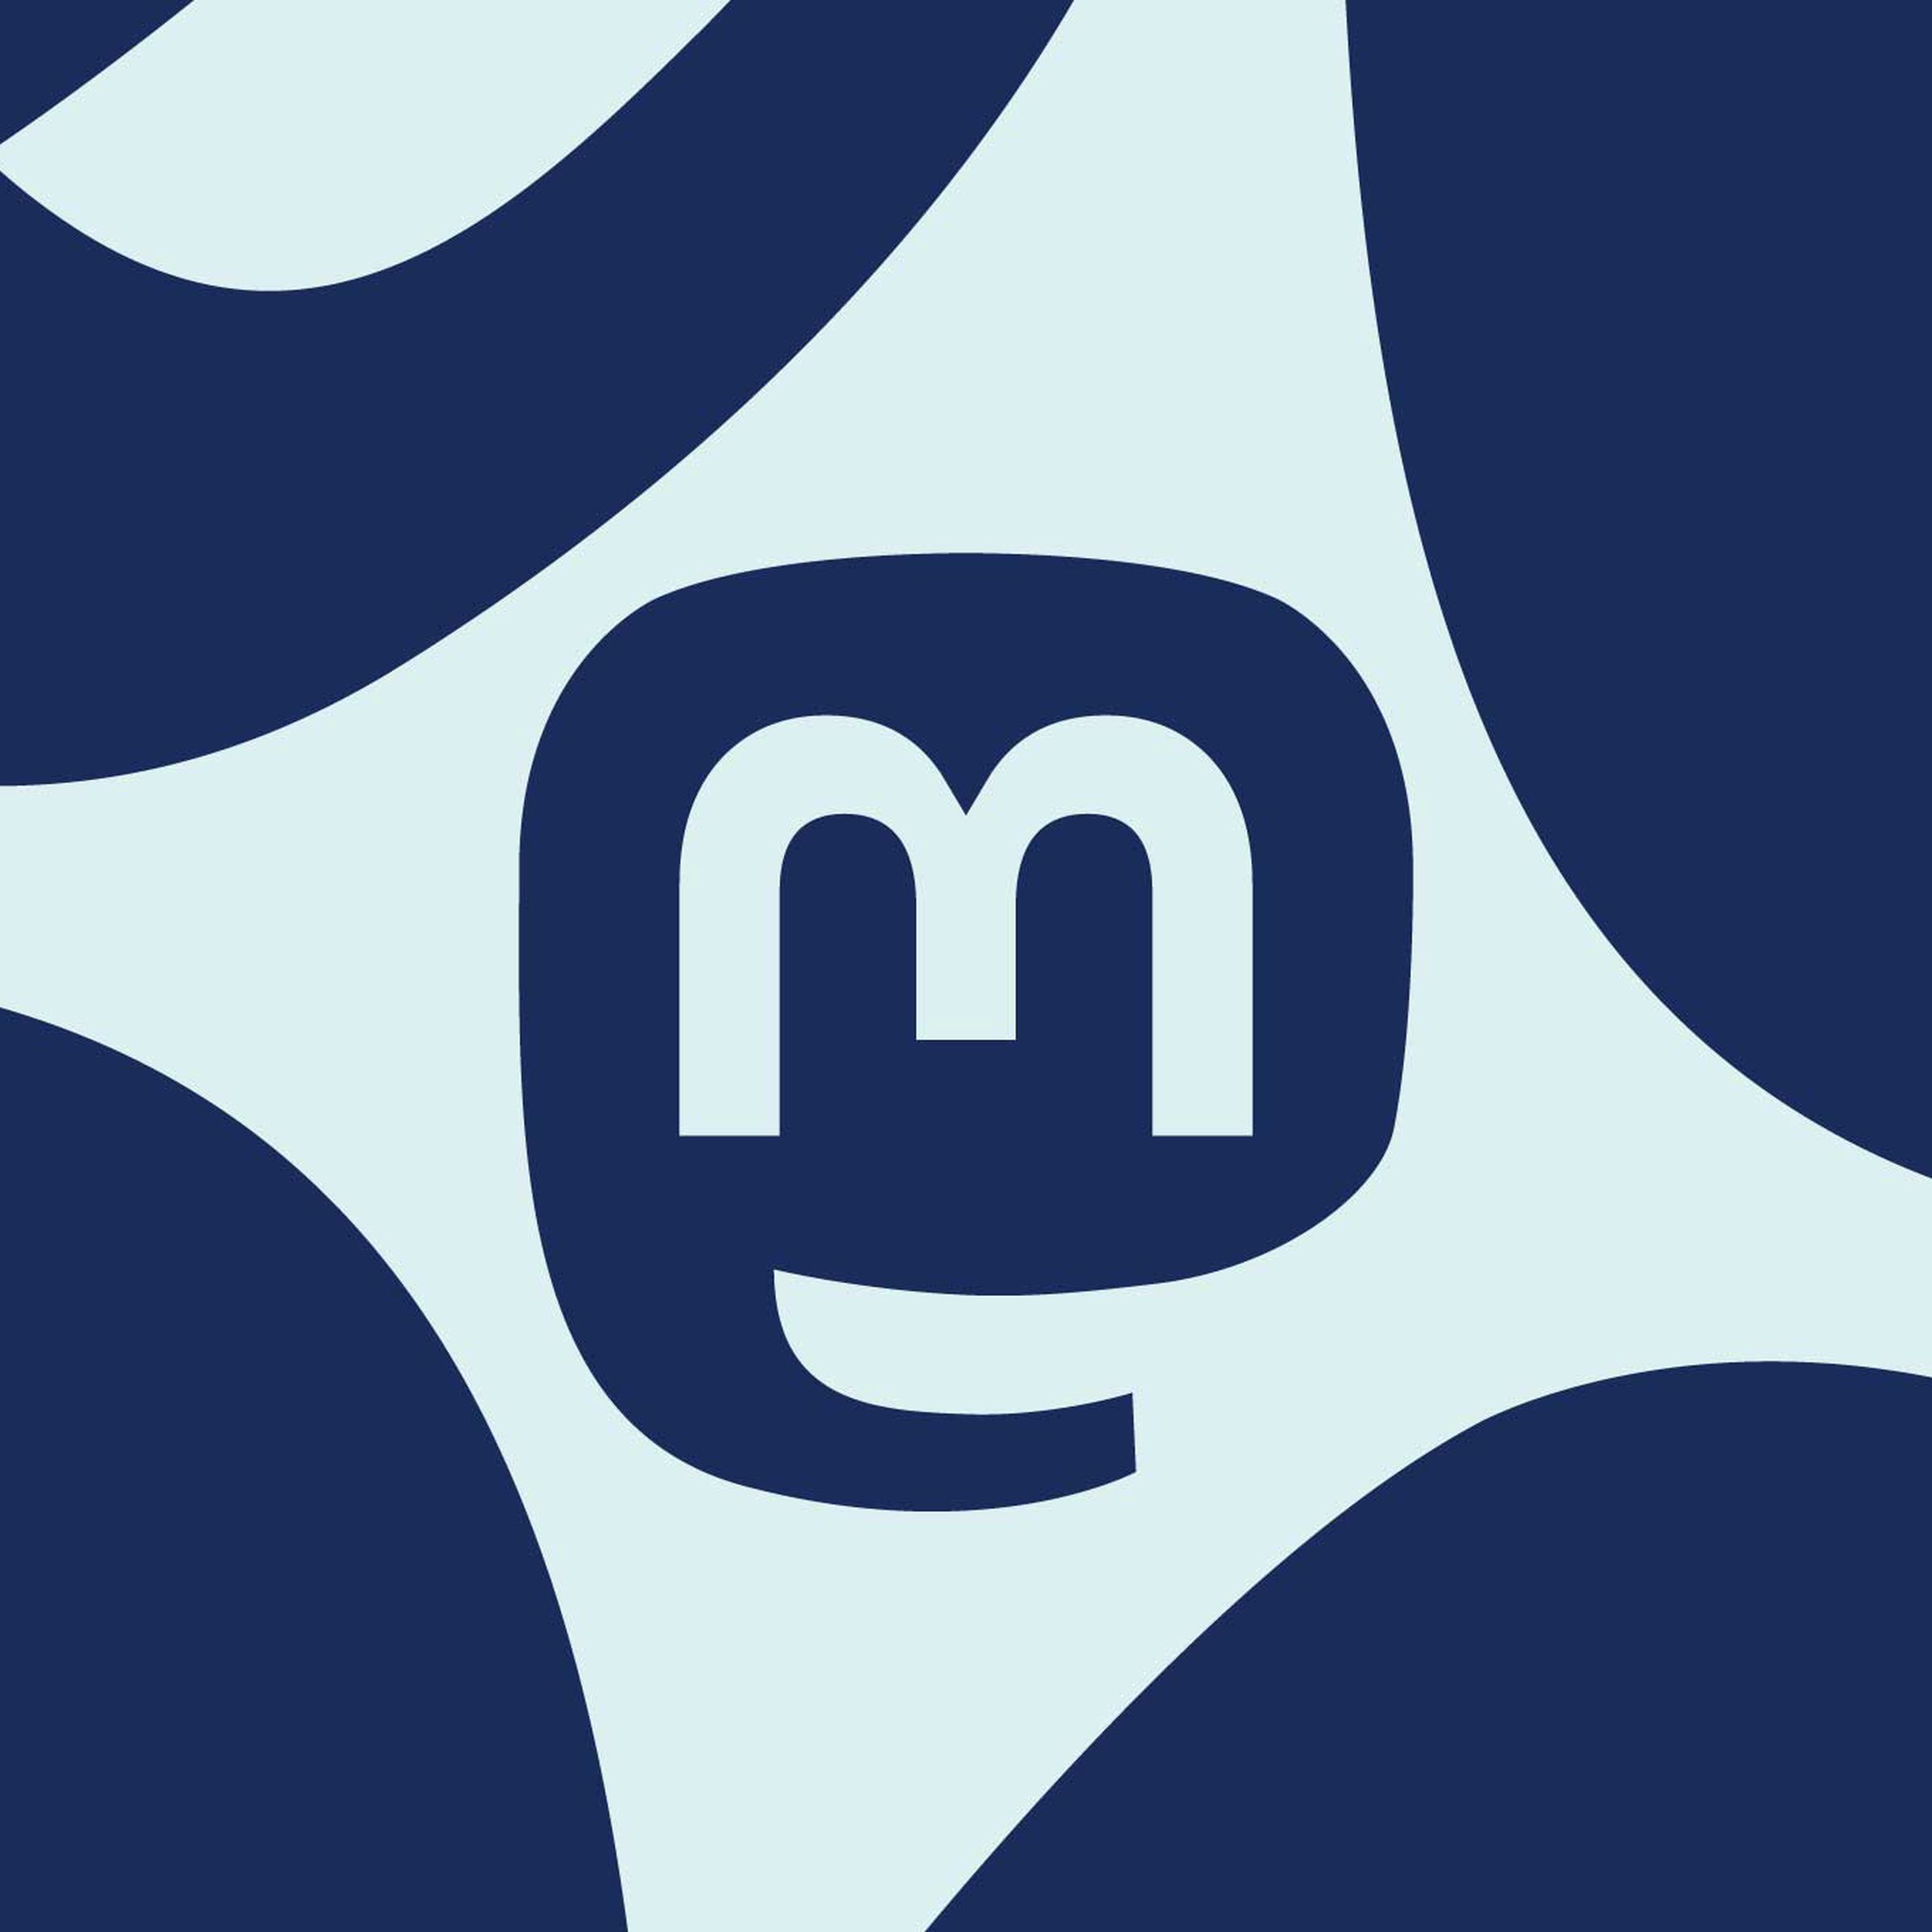 Dark blue Mastodon logo on a light blue background, centered with four small, dark blue pieces of the logo spread around it in different orientations in the four corners of the image.